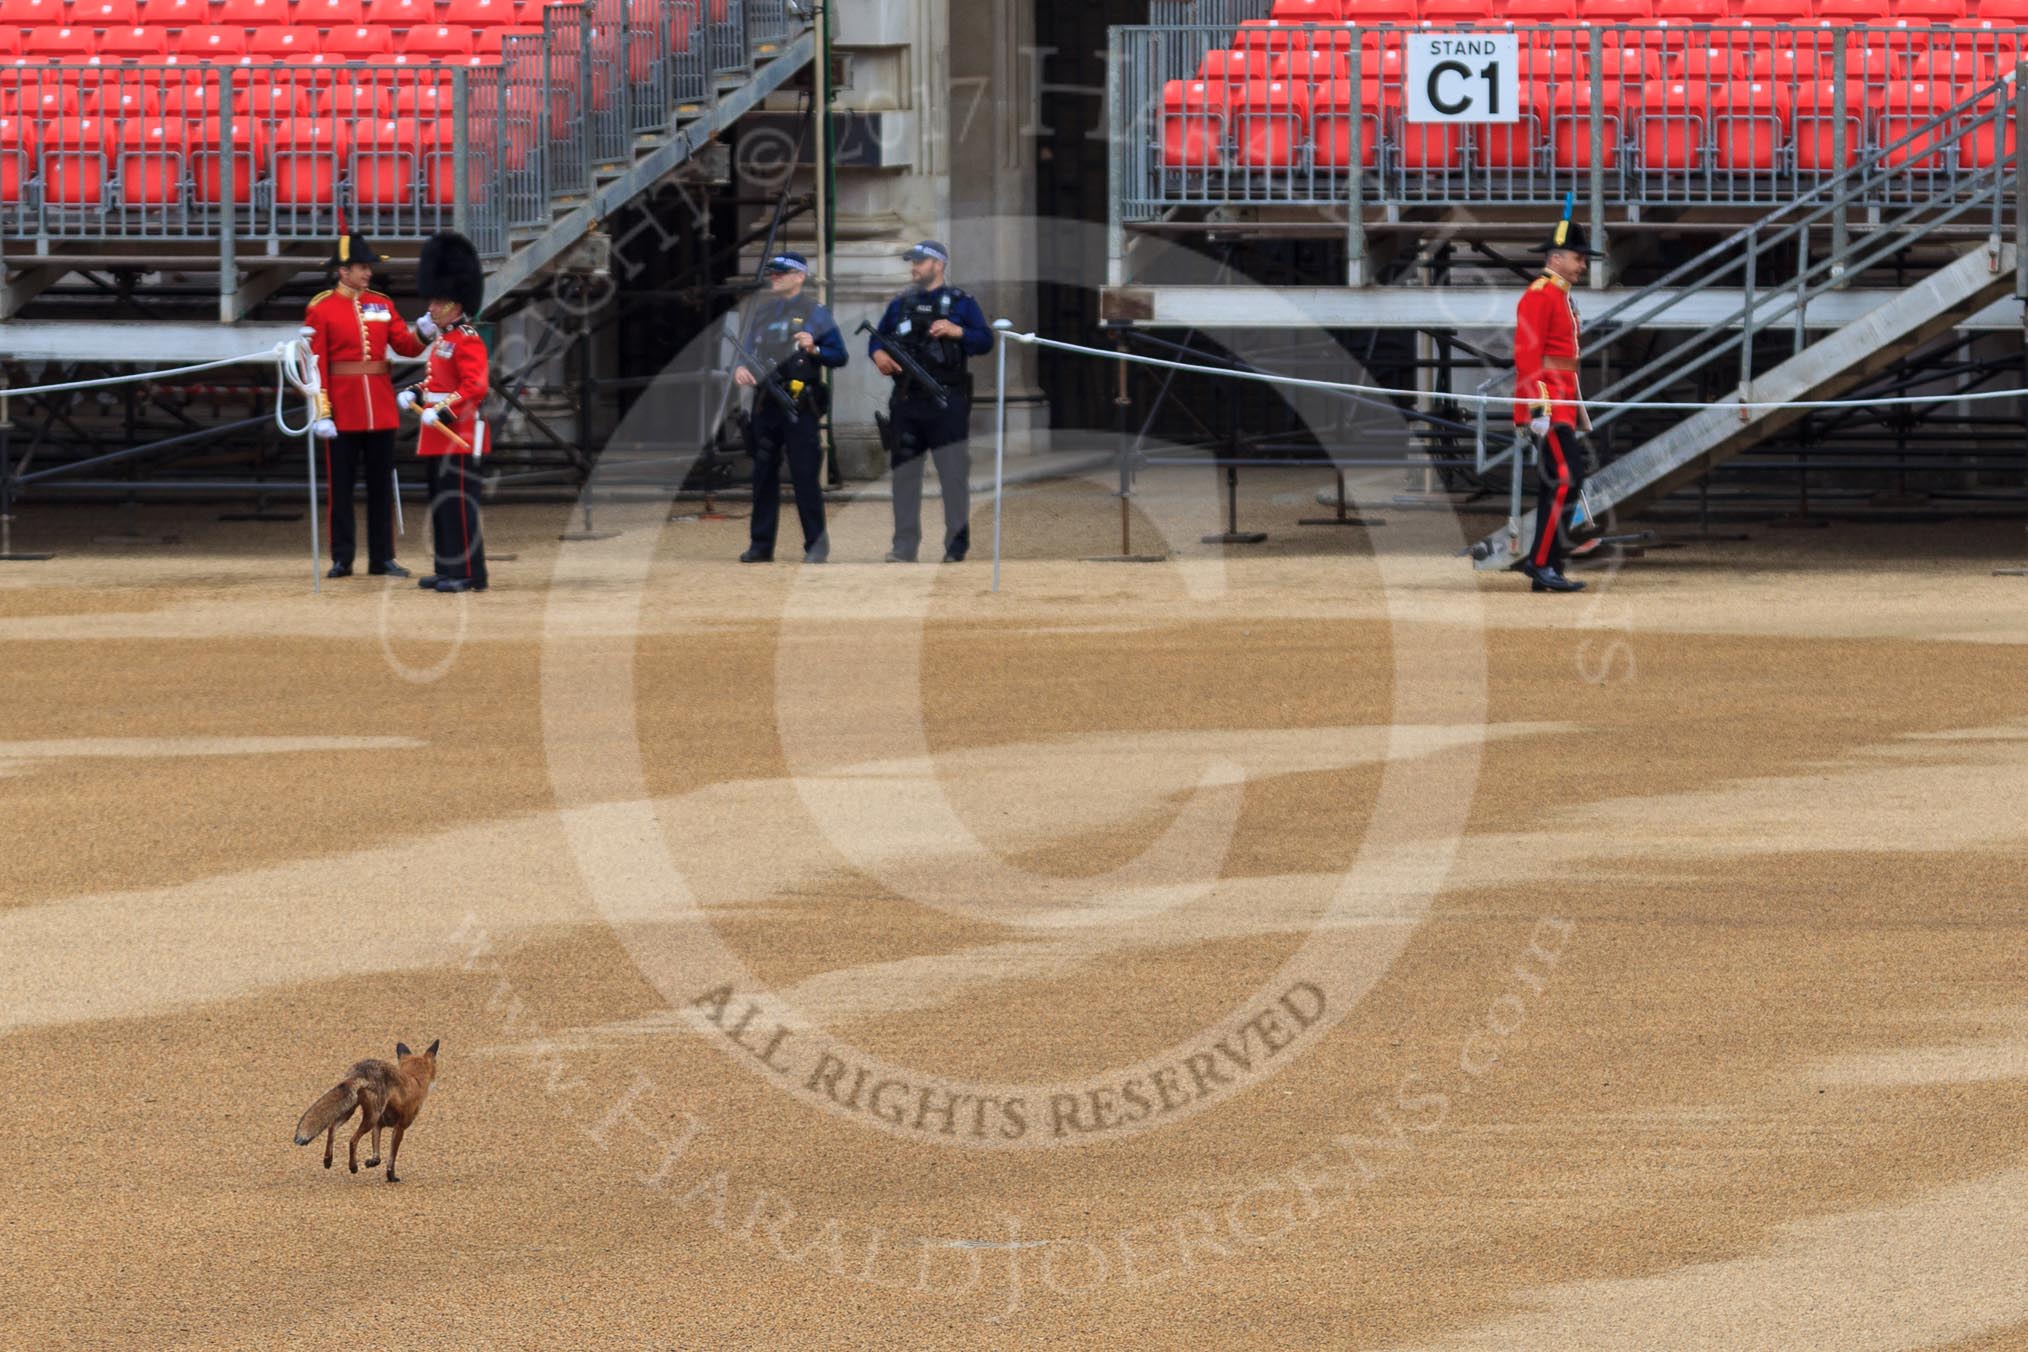 An urban fox running across Horse Guards Parade before Trooping the Colour 2018, The Queen's Birthday Parade at Horse Guards Parade, Westminster, London, 9 June 2018, 09:01.